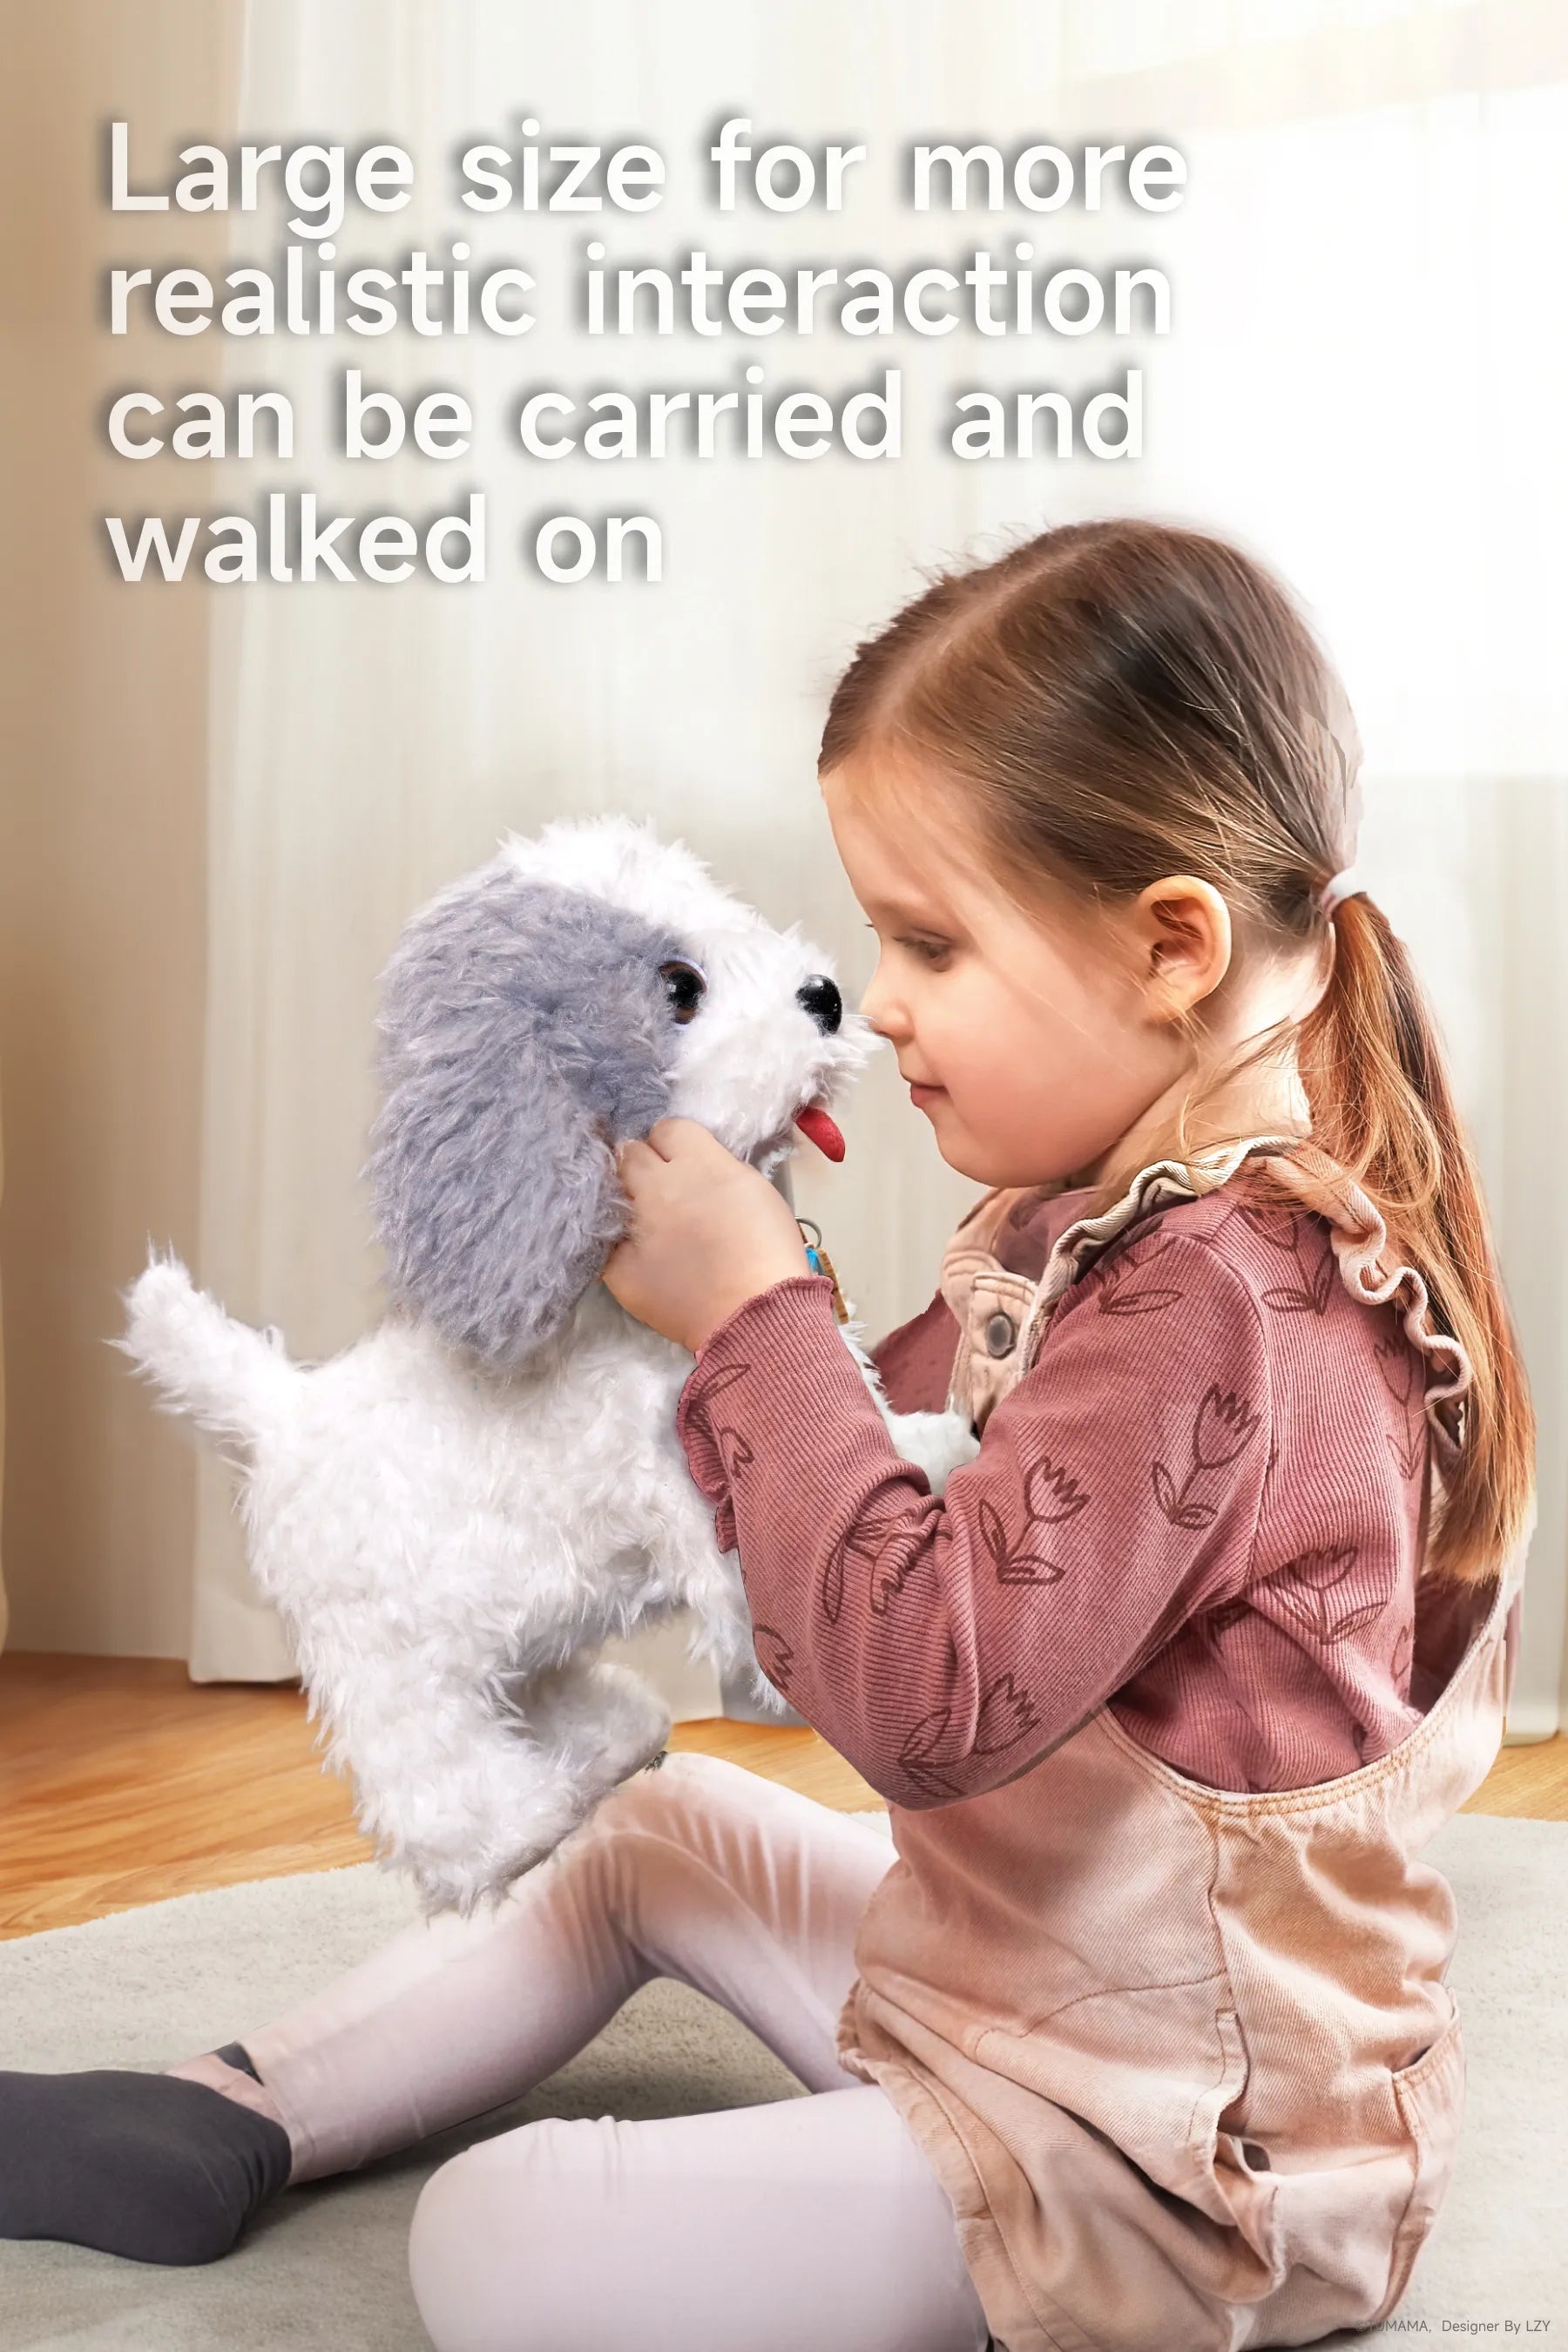 Walking dog toys with remote and voice activated commands